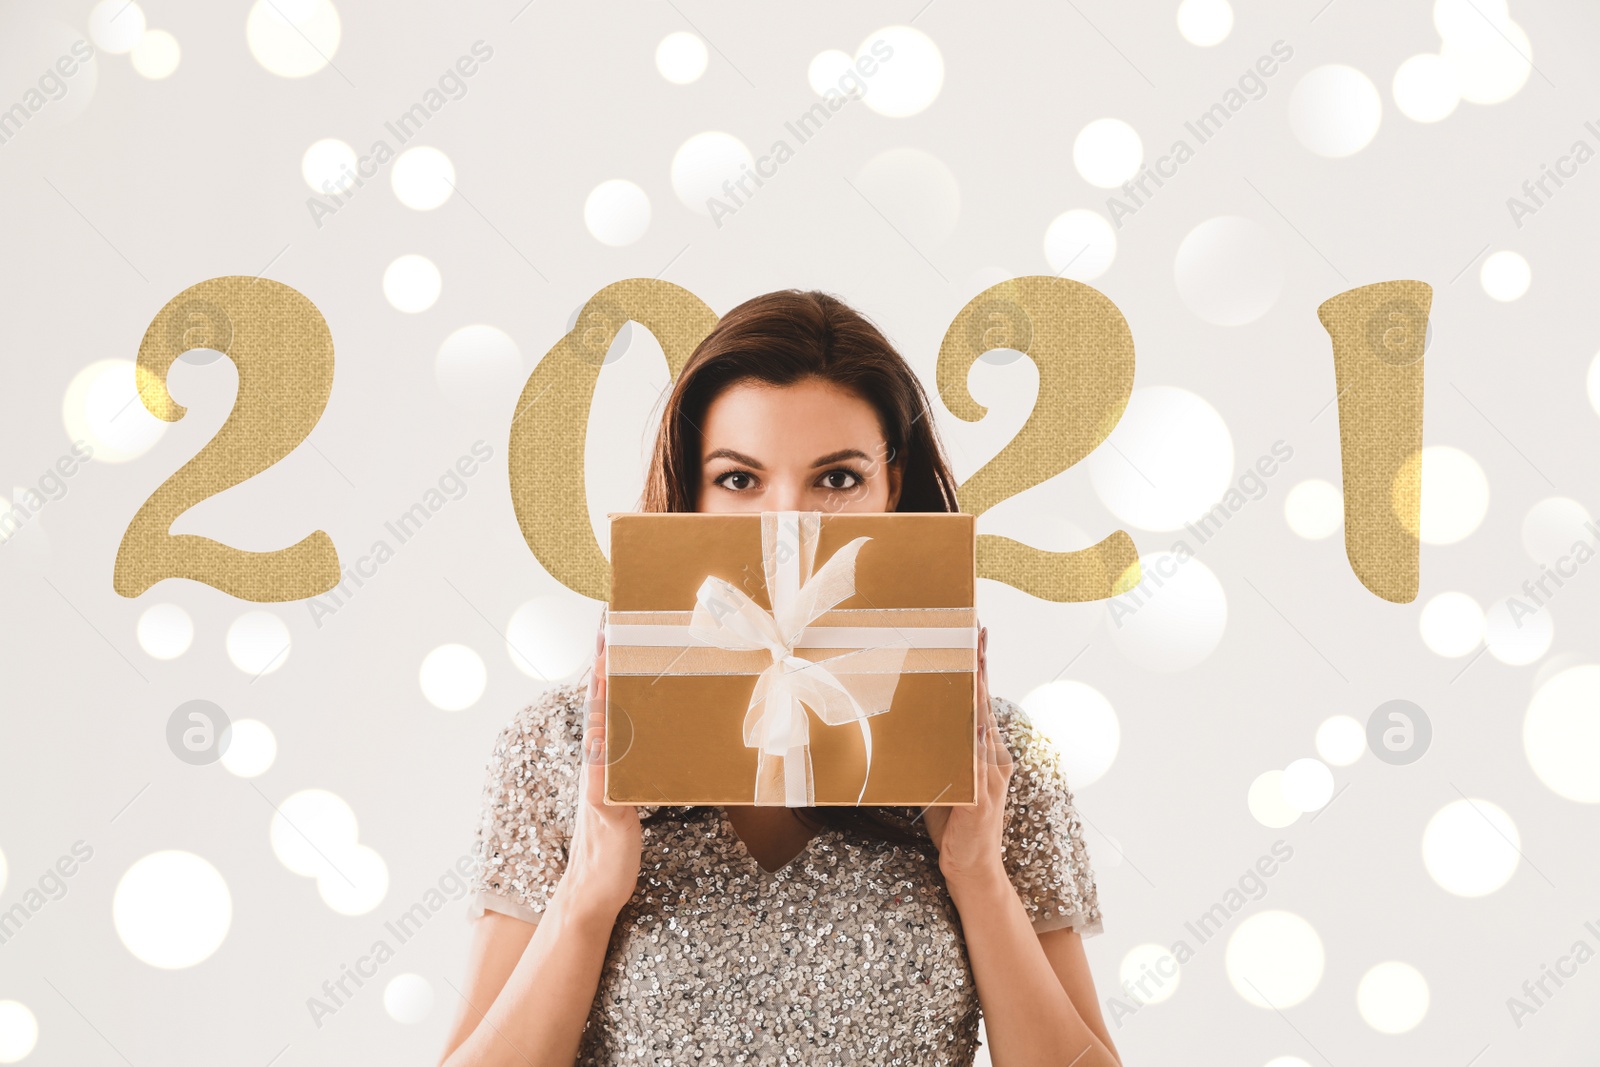 Image of Beautiful woman with Christmas gift against blurred background